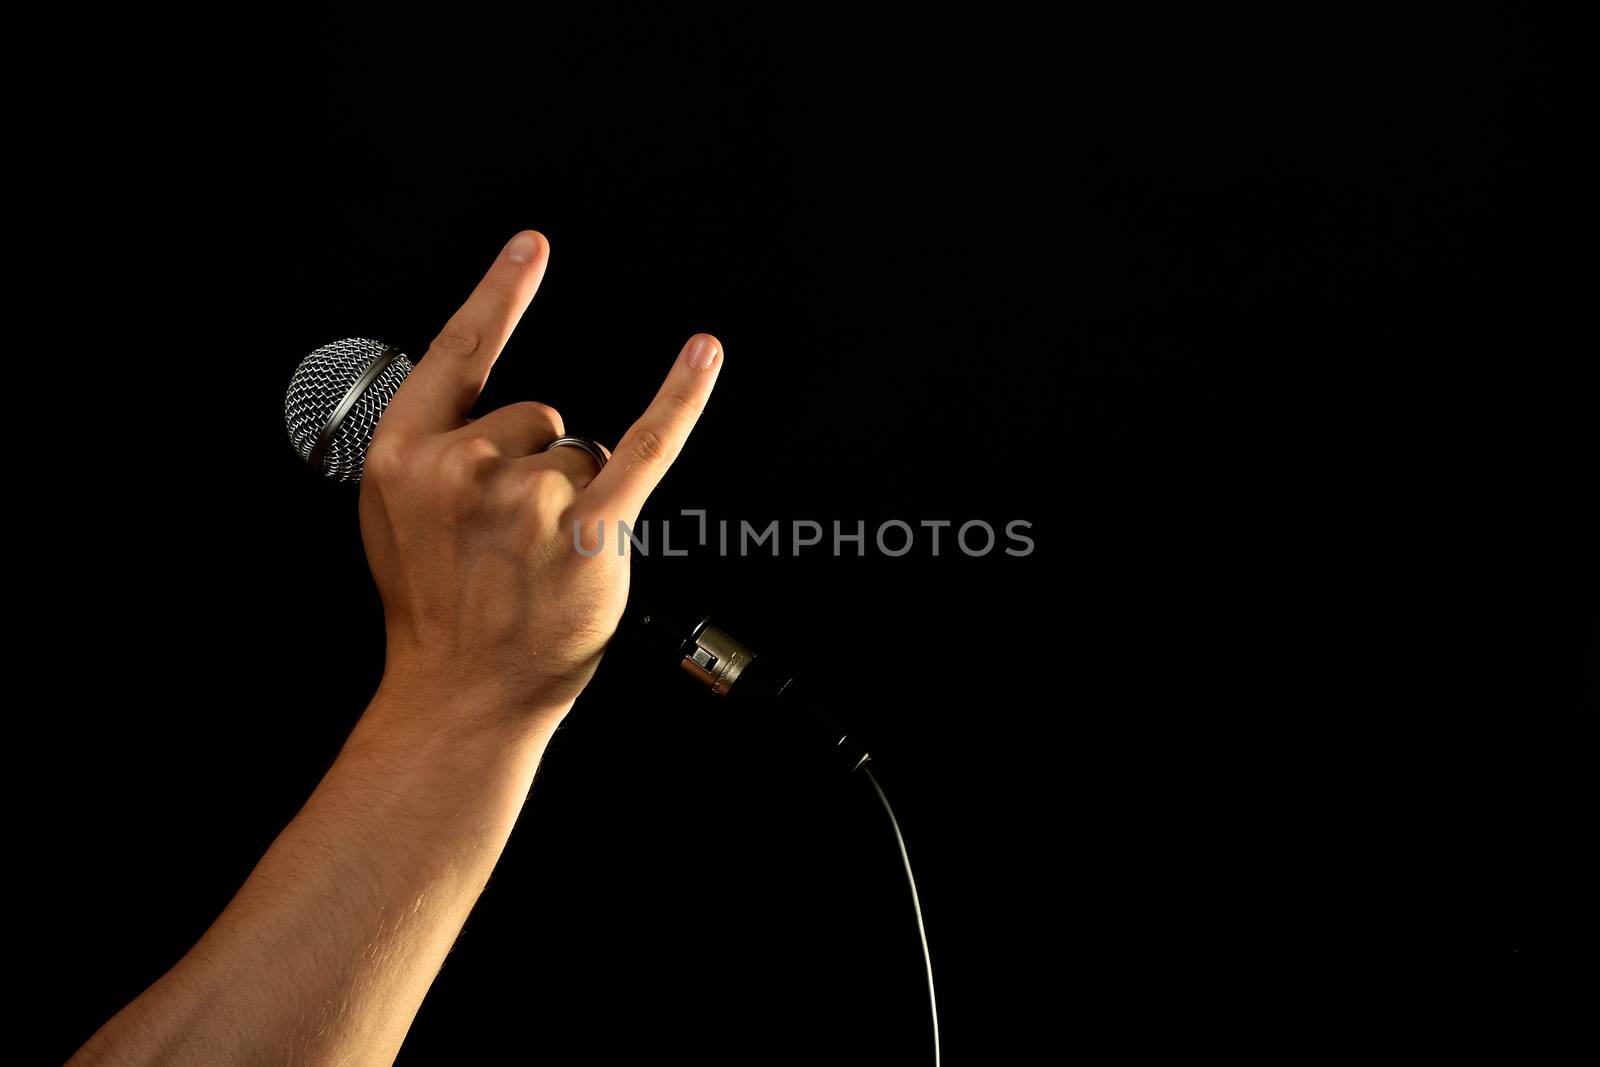 Male hand holding microphone with devil horns rock metal sign isolated on black background